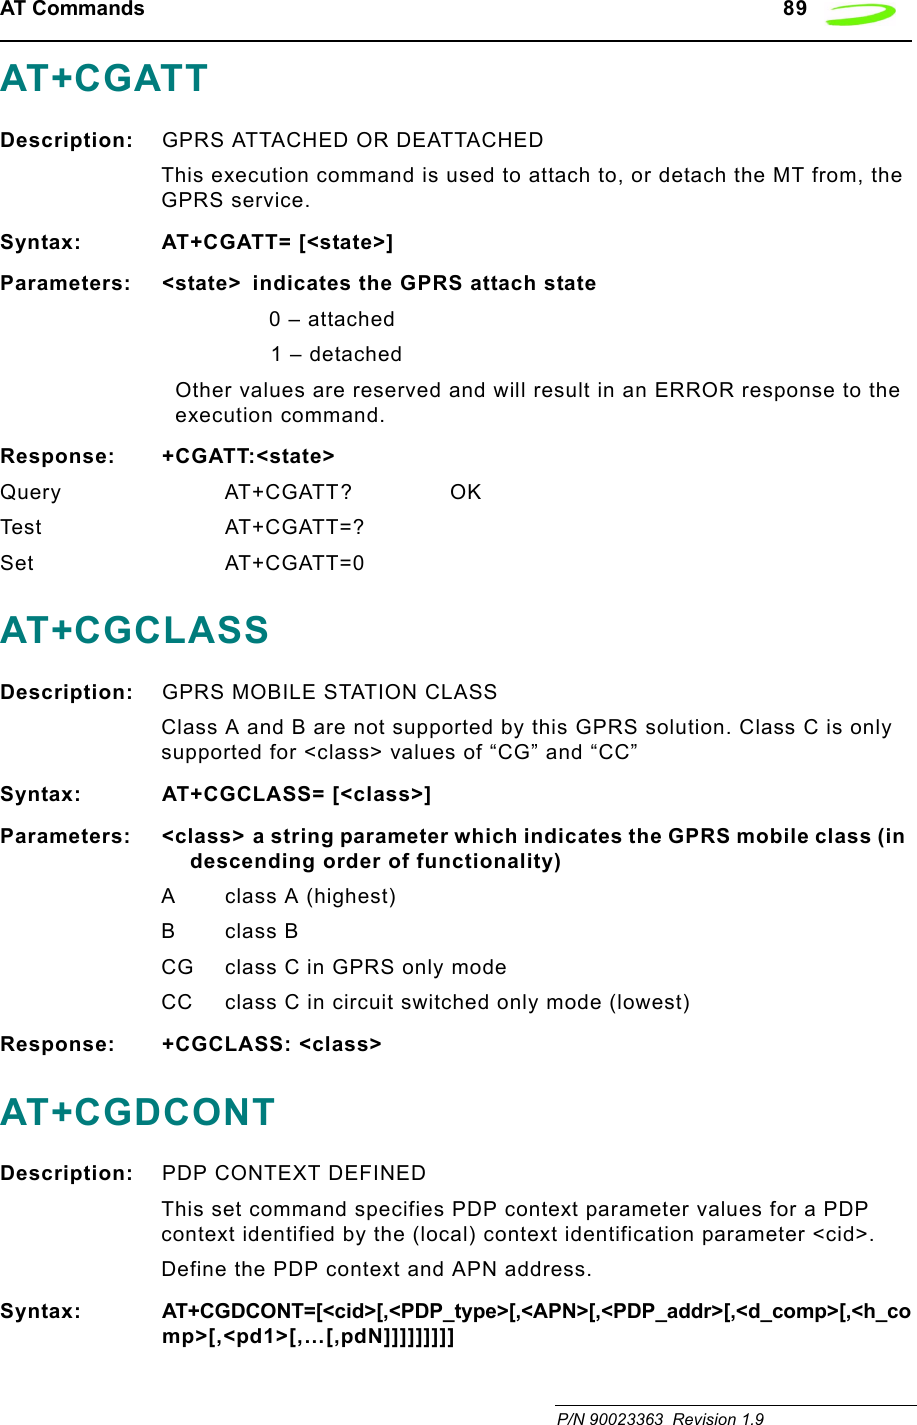 AT Commands   89 P/N 90023363  Revision 1.9AT+CGATTDescription: GPRS ATTACHED OR DEATTACHEDThis execution command is used to attach to, or detach the MT from, the GPRS service.Syntax: AT+CGATT= [&lt;state&gt;]Parameters: &lt;state&gt;  indicates the GPRS attach state0 – attached1 – detachedOther values are reserved and will result in an ERROR response to the execution command.Response: +CGATT:&lt;state&gt;Query AT+CGATT? OKTest AT+CGATT=?Set AT+CGATT=0AT+CGCLASSDescription: GPRS MOBILE STATION CLASSClass A and B are not supported by this GPRS solution. Class C is only supported for &lt;class&gt; values of “CG” and “CC”Syntax: AT+CGCLASS= [&lt;class&gt;]Parameters: &lt;class&gt; a string parameter which indicates the GPRS mobile class (in descending order of functionality)A class A (highest)Bclass BCG class C in GPRS only modeCC class C in circuit switched only mode (lowest)Response: +CGCLASS: &lt;class&gt;AT+CGDCONTDescription: PDP CONTEXT DEFINEDThis set command specifies PDP context parameter values for a PDP context identified by the (local) context identification parameter &lt;cid&gt;.Define the PDP context and APN address.Syntax: AT+CGDCONT=[&lt;cid&gt;[,&lt;PDP_type&gt;[,&lt;APN&gt;[,&lt;PDP_addr&gt;[,&lt;d_comp&gt;[,&lt;h_comp&gt;[,&lt;pd1&gt;[,…[,pdN]]]]]]]]]